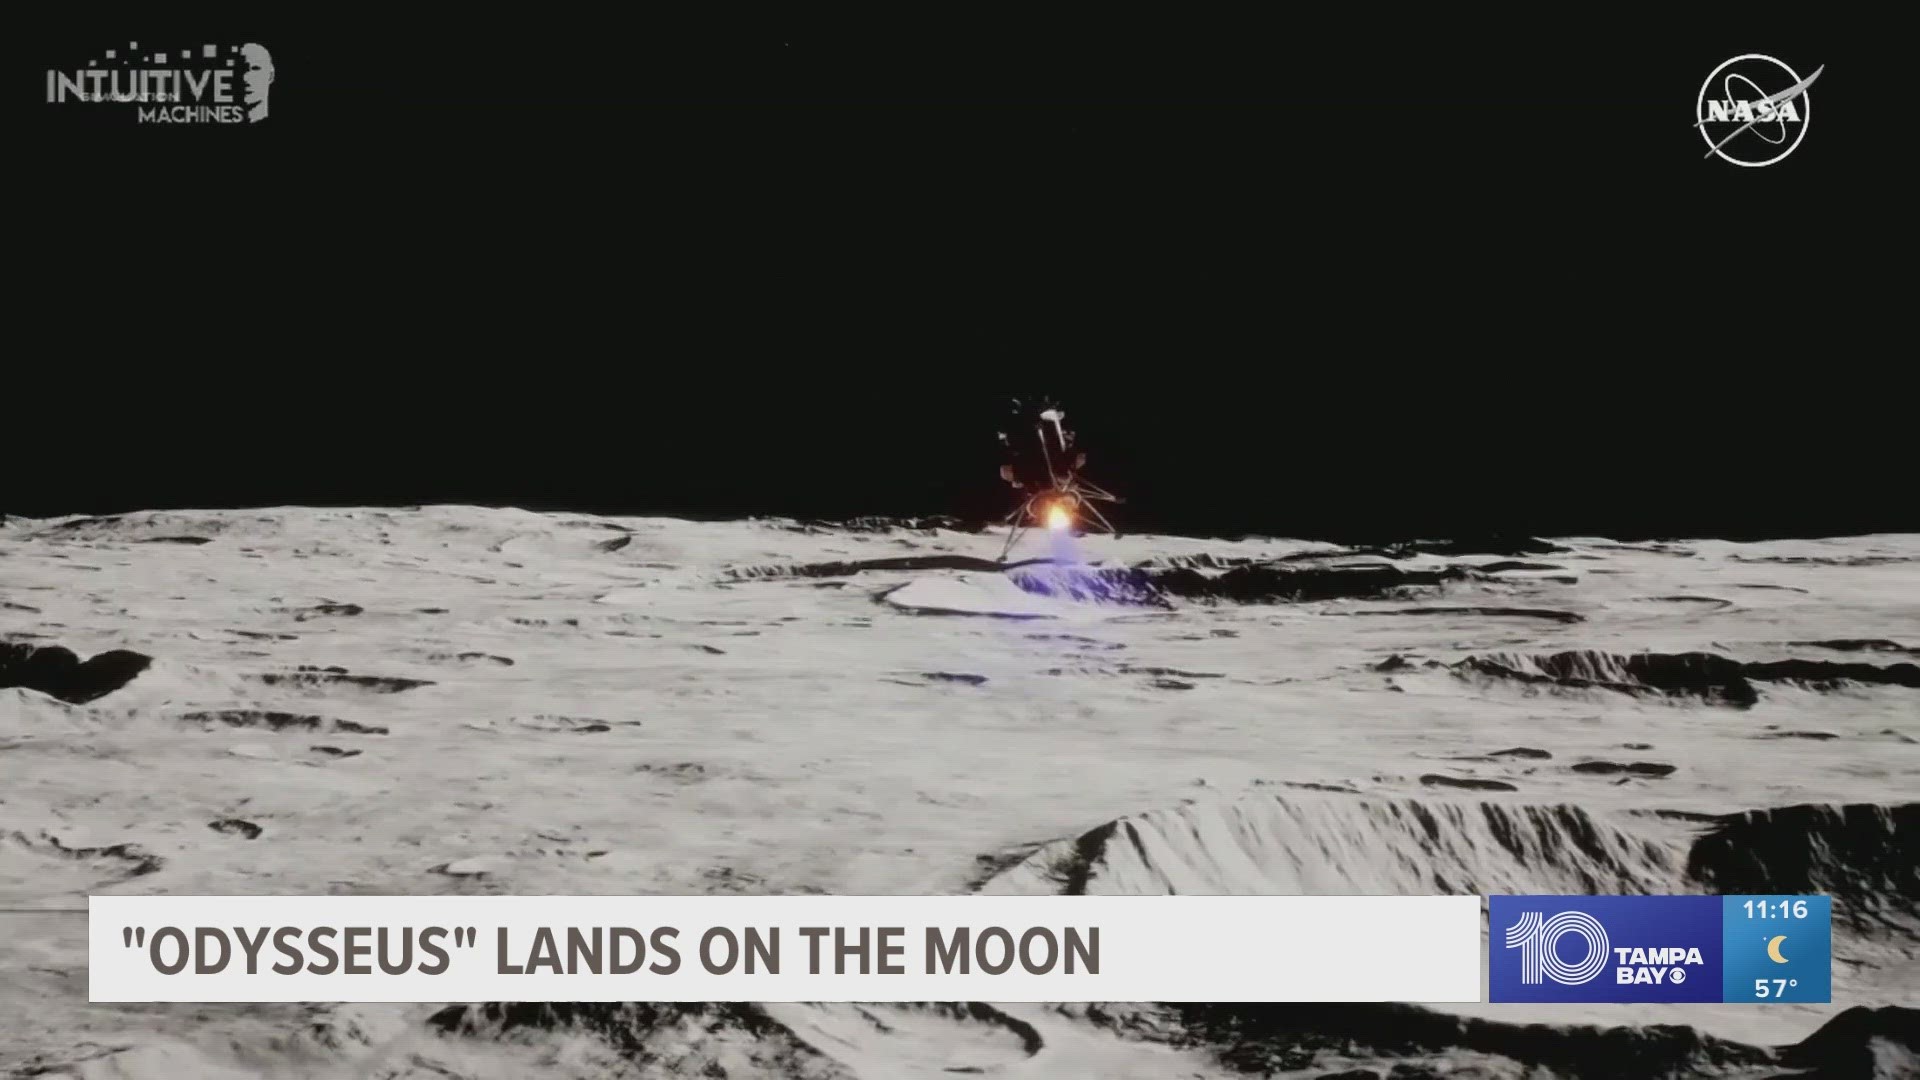 The landing put the U.S. back on the surface for the first time since NASA’s famed Apollo moonwalkers.